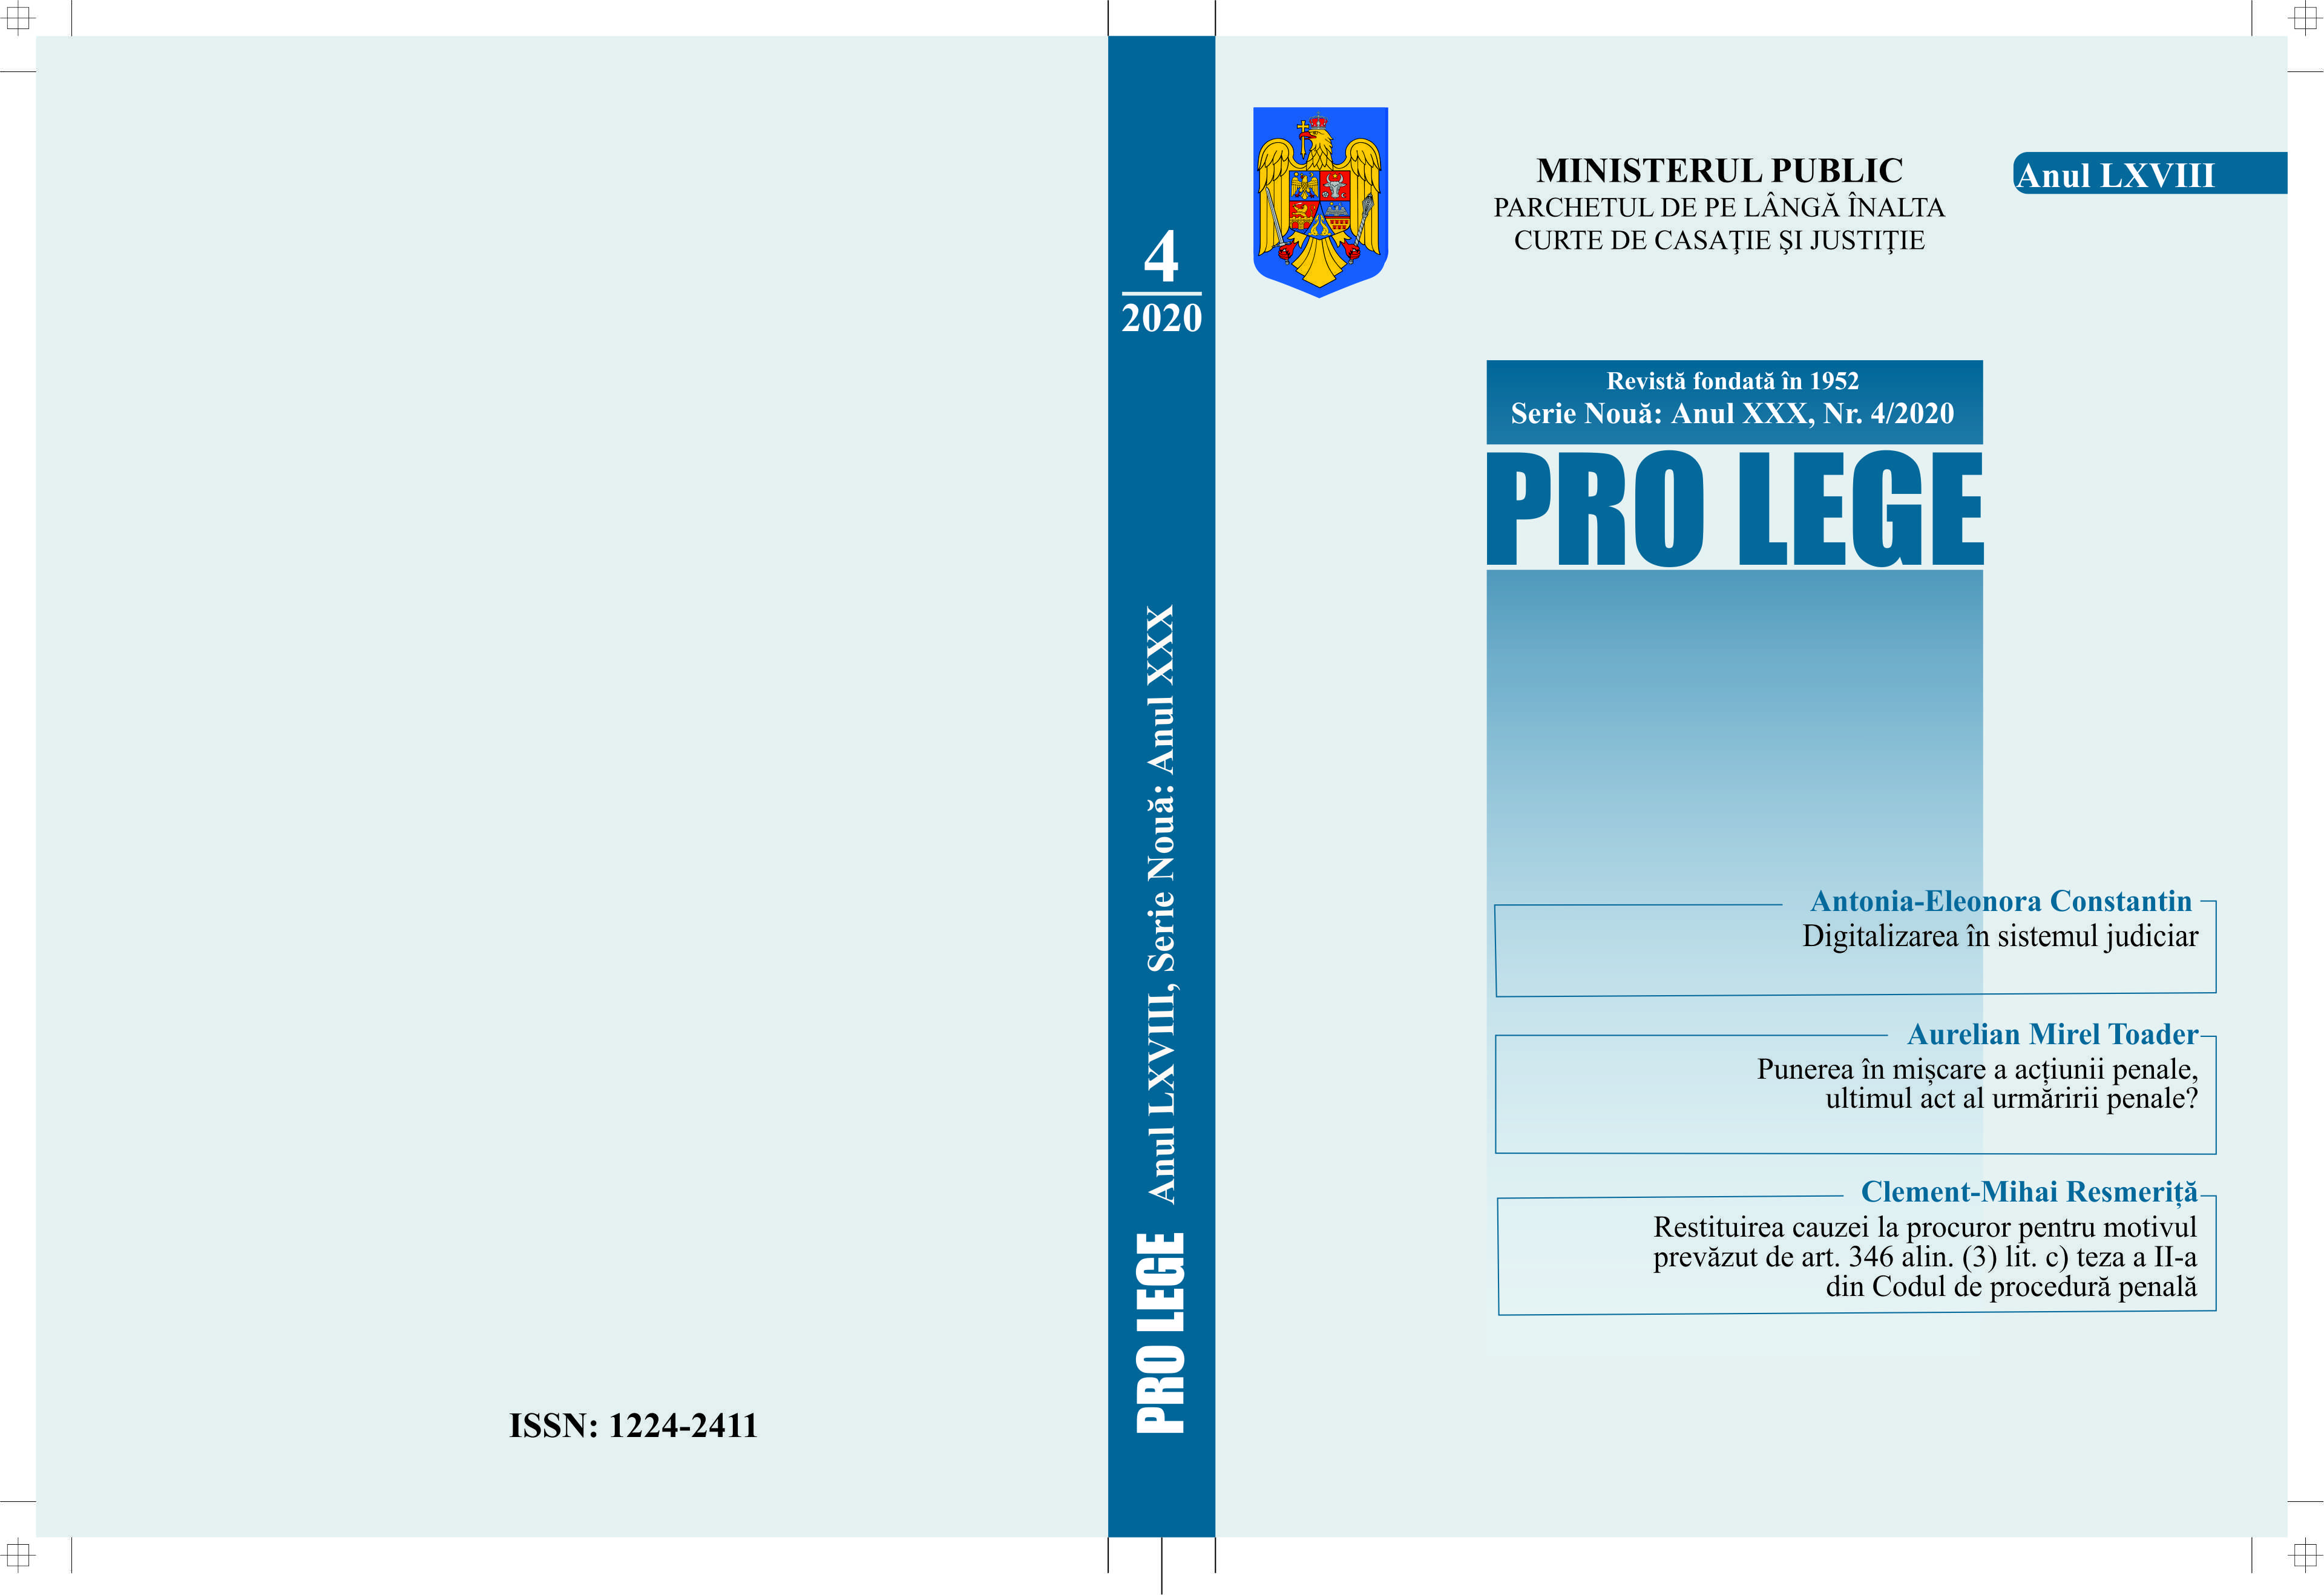 Swedish prosecutor's office. The Romanian Prosecutor's Office. Some elements of comparative law and good practices Cover Image